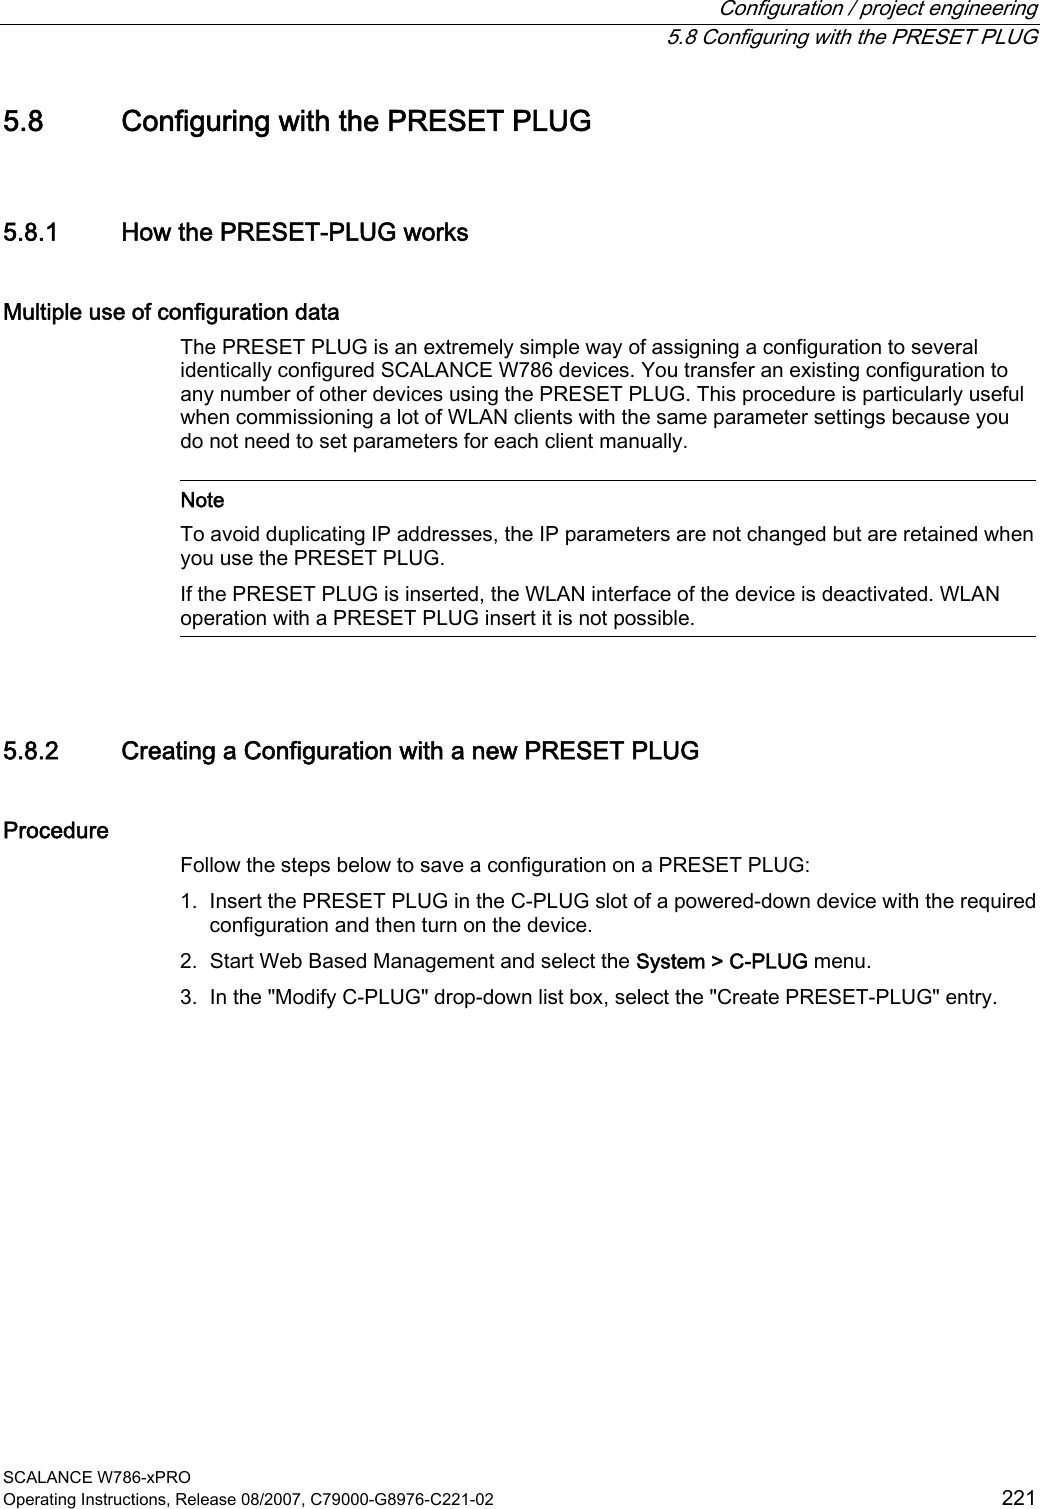  Configuration / project engineering   5.8 Configuring with the PRESET PLUG SCALANCE W786-xPRO Operating Instructions, Release 08/2007, C79000-G8976-C221-02  221 5.8 Configuring with the PRESET PLUG 5.8.1 How the PRESET-PLUG works Multiple use of configuration data The PRESET PLUG is an extremely simple way of assigning a configuration to several identically configured SCALANCE W786 devices. You transfer an existing configuration to any number of other devices using the PRESET PLUG. This procedure is particularly useful when commissioning a lot of WLAN clients with the same parameter settings because you do not need to set parameters for each client manually.    Note To avoid duplicating IP addresses, the IP parameters are not changed but are retained when you use the PRESET PLUG. If the PRESET PLUG is inserted, the WLAN interface of the device is deactivated. WLAN operation with a PRESET PLUG insert it is not possible.  5.8.2 Creating a Configuration with a new PRESET PLUG Procedure Follow the steps below to save a configuration on a PRESET PLUG: 1. Insert the PRESET PLUG in the C-PLUG slot of a powered-down device with the required configuration and then turn on the device. 2. Start Web Based Management and select the System &gt; C-PLUG menu. 3. In the &quot;Modify C-PLUG&quot; drop-down list box, select the &quot;Create PRESET-PLUG&quot; entry. 